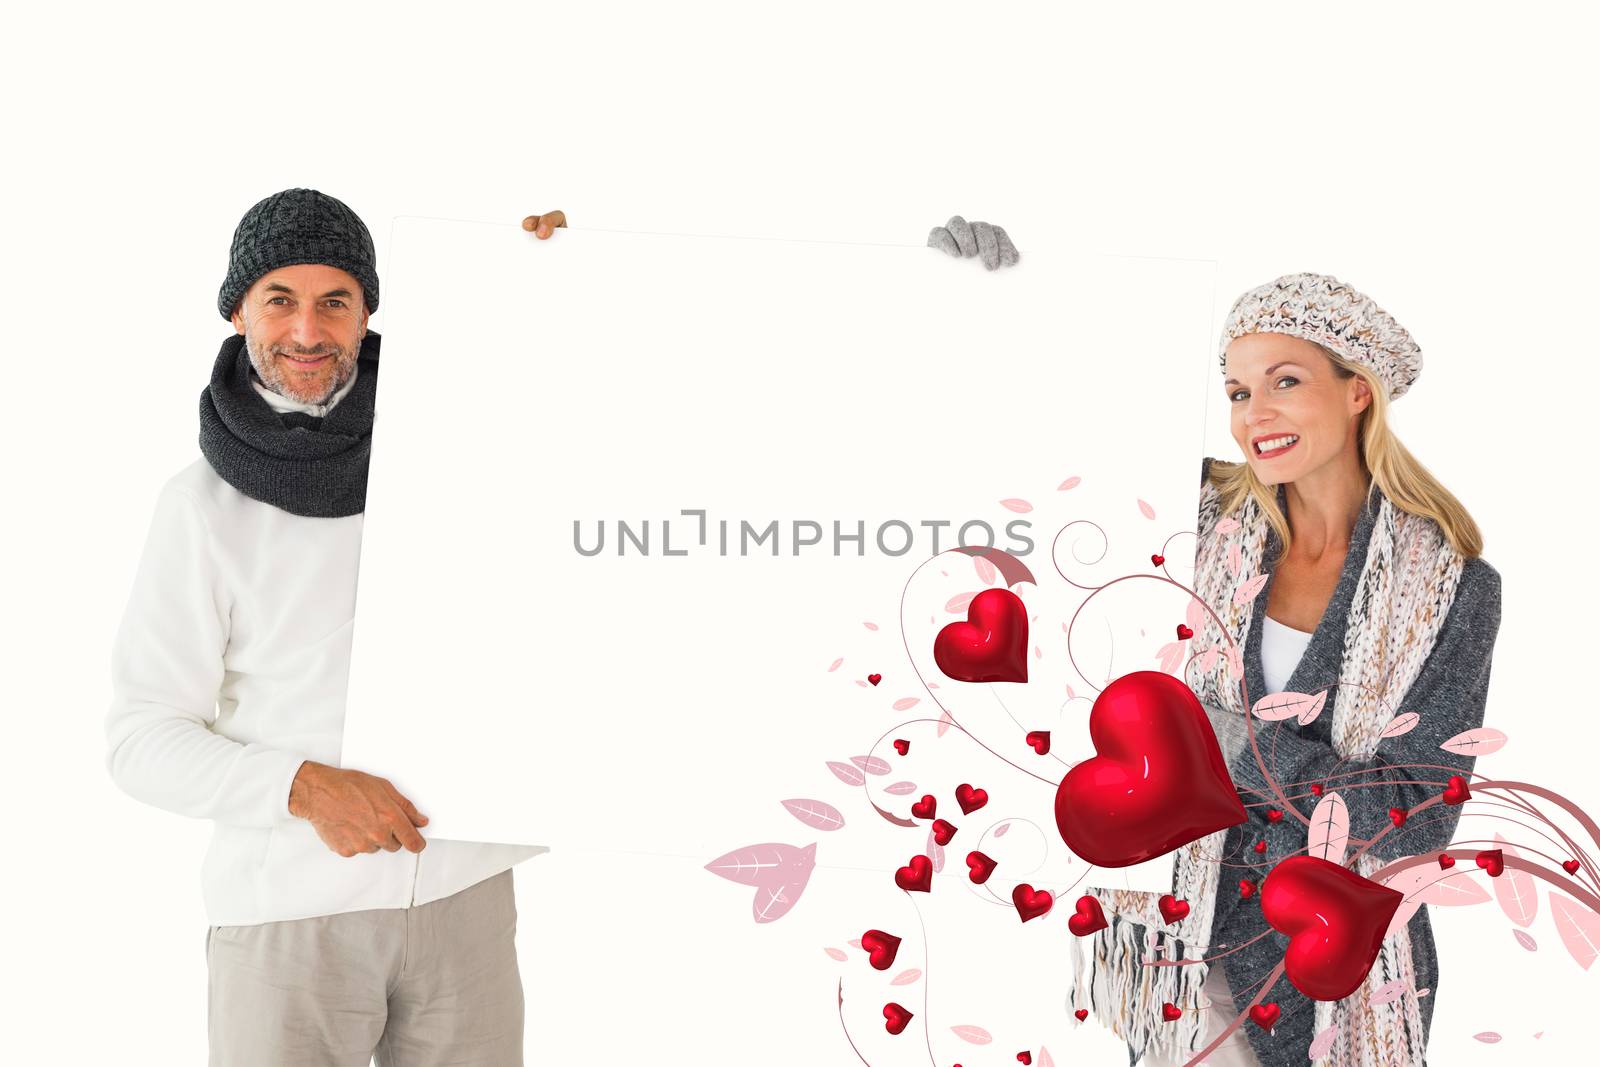 Smiling couple in winter fashion holding poster against valentines heart design